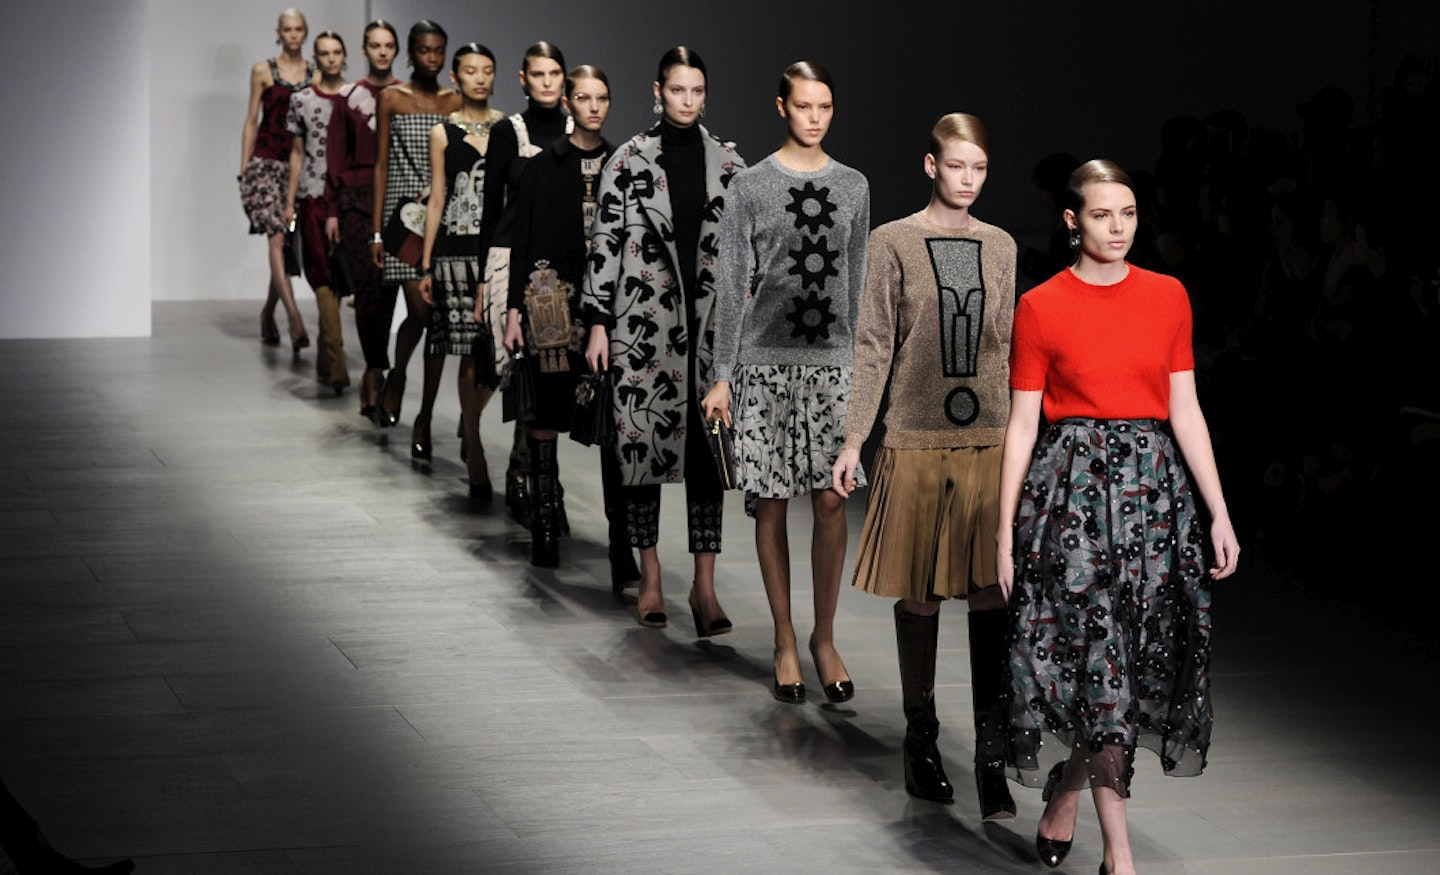 The 2014 LFW Holly Fulton show